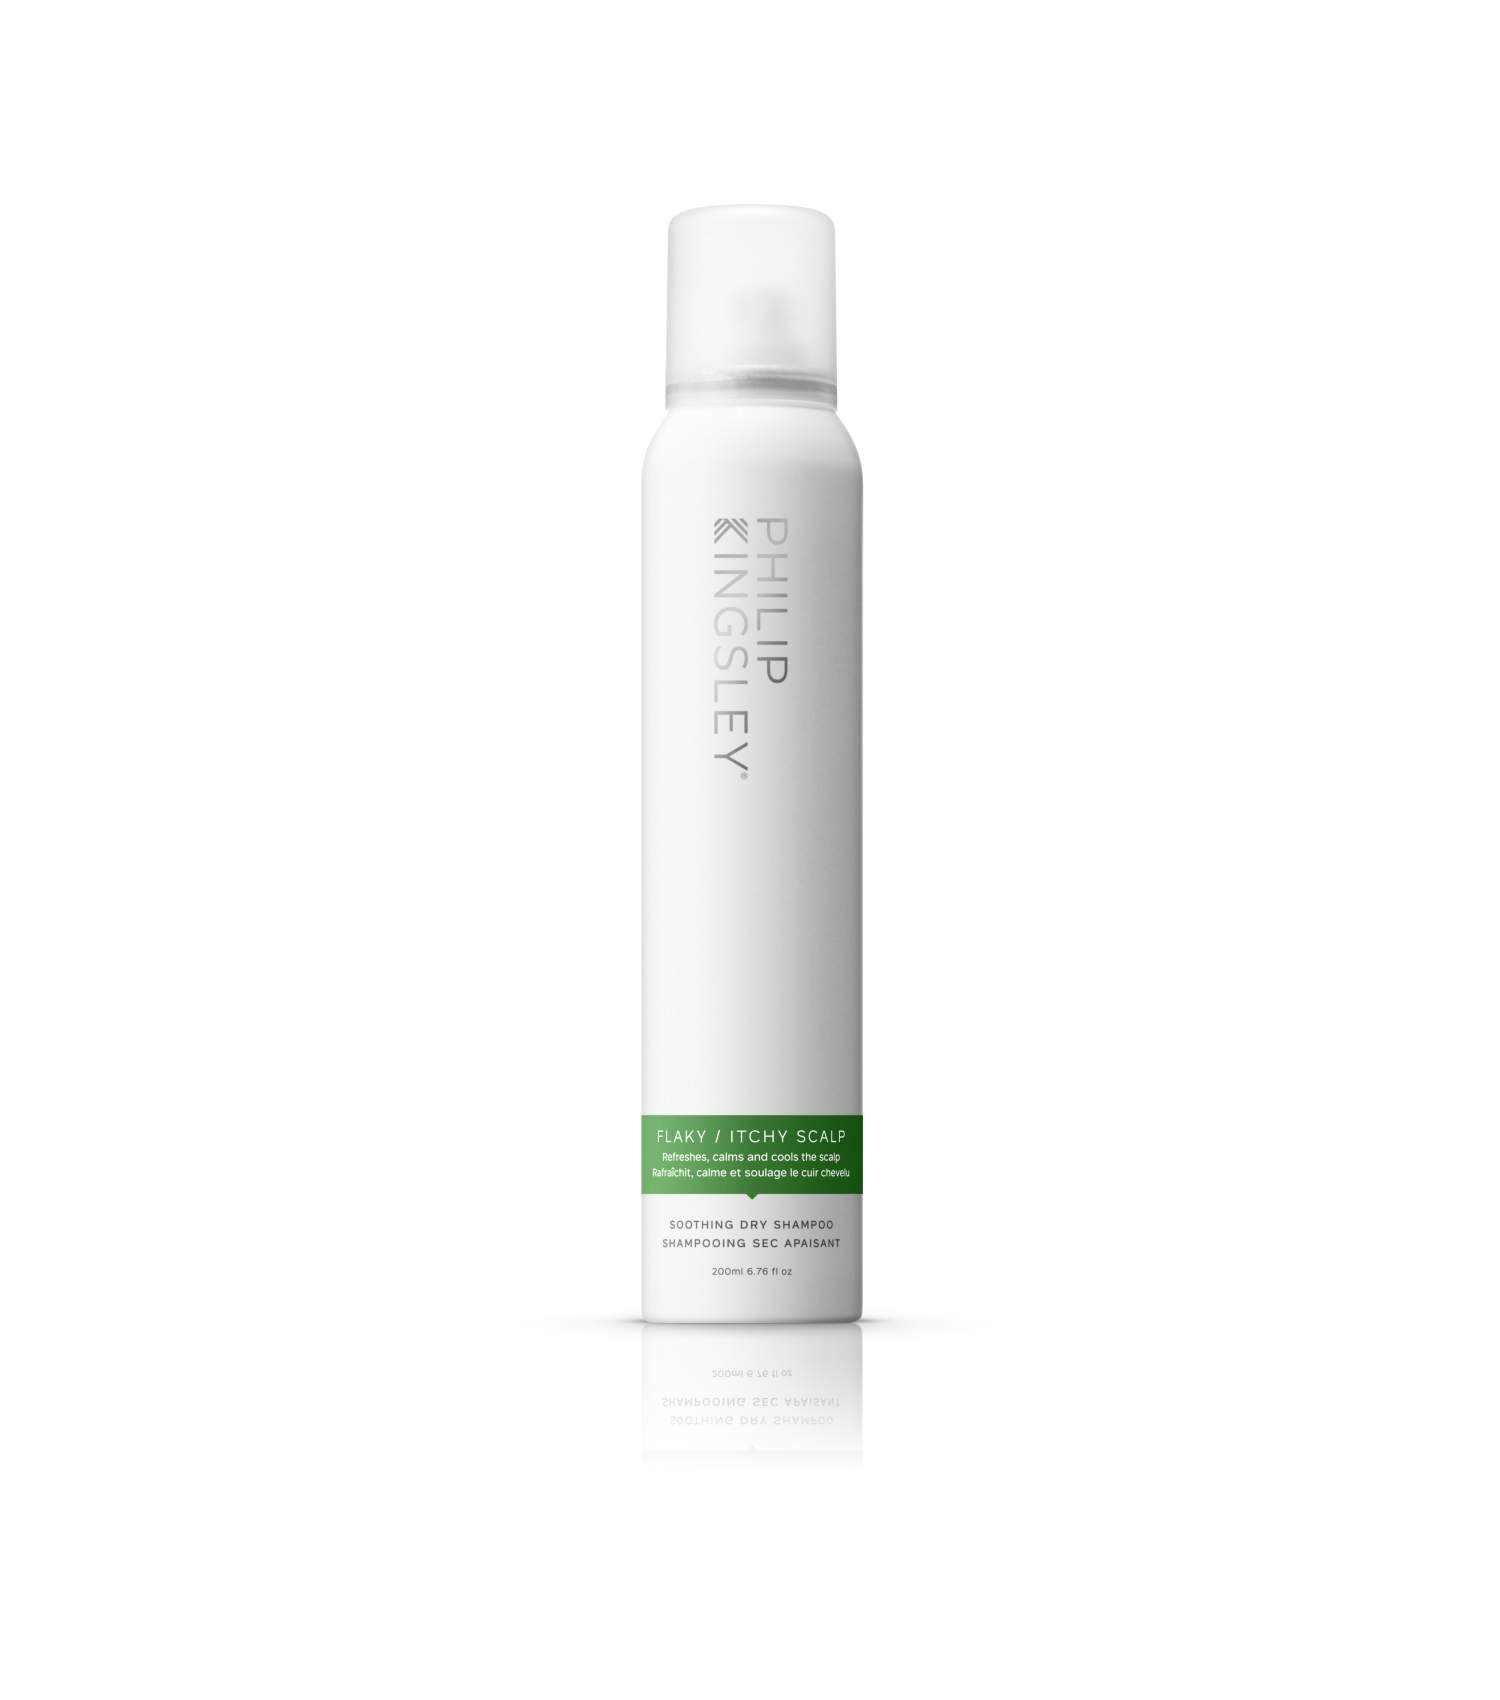 Philip Kingsley Flaky/Itchy Scalp Soothing Dry Shampoo Philip Kingsley Flaky/Itchy Scalp Soothing Dry Shampoo 1